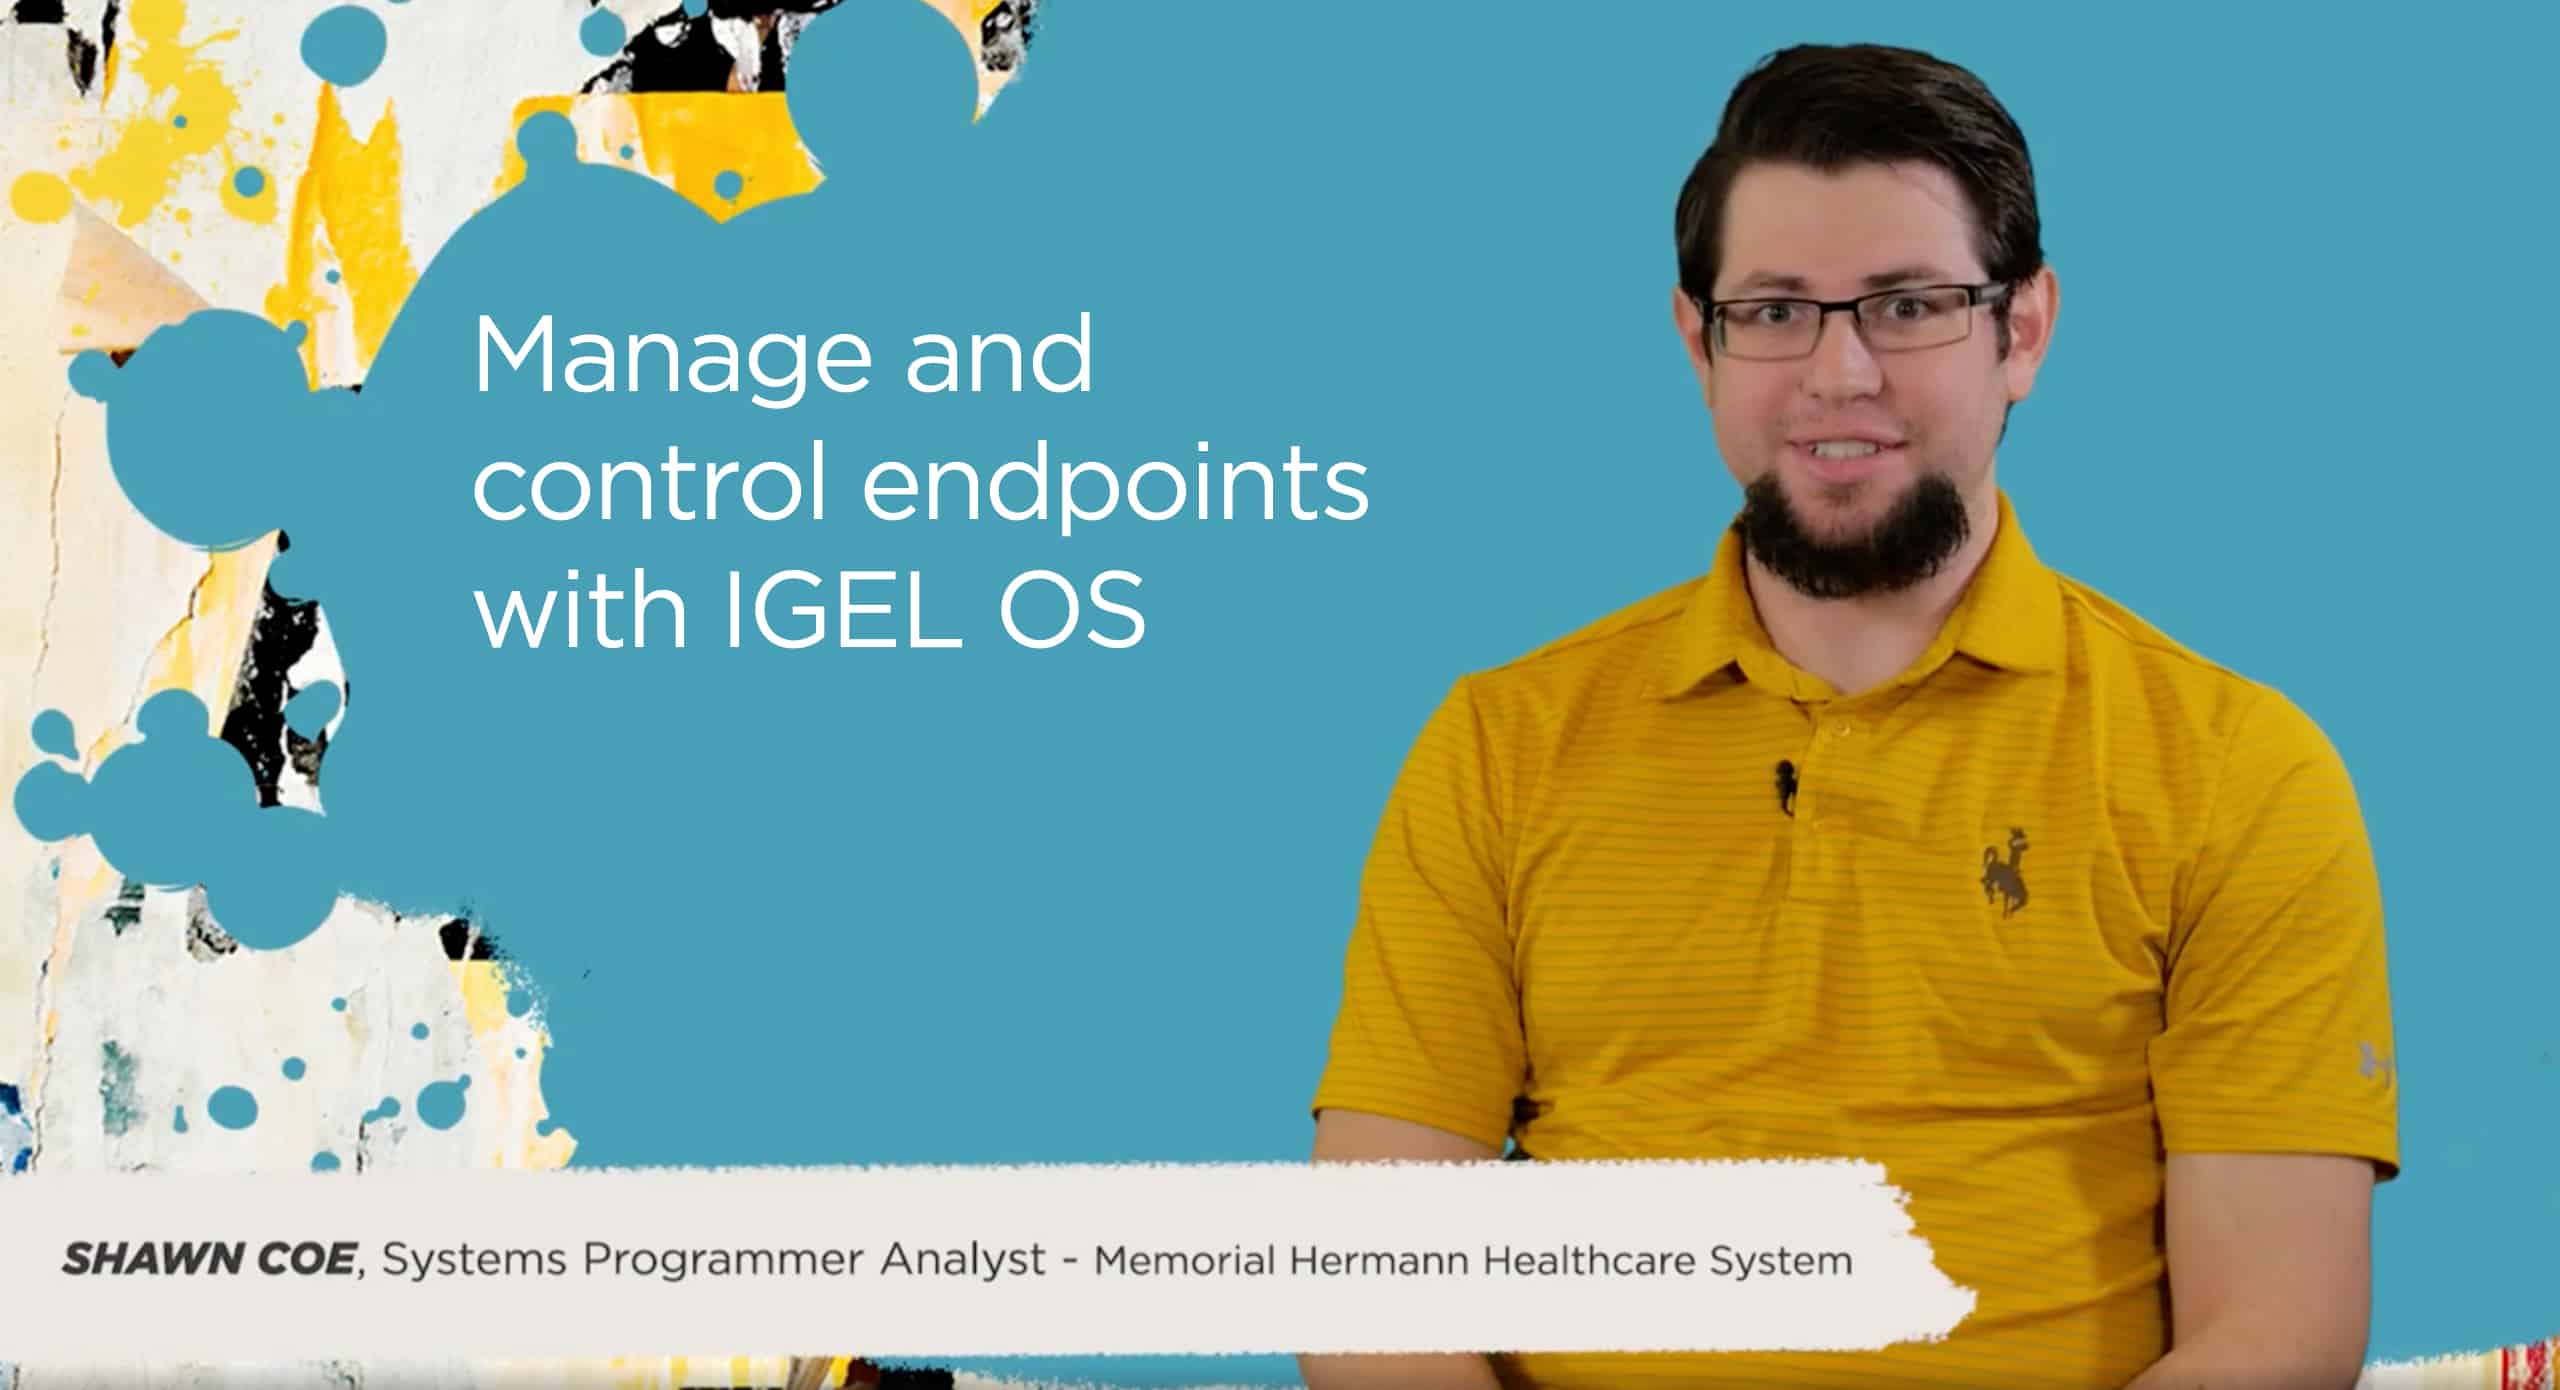 Manage and control endpoints with IGEL OS (Shawn Coe, Memorial Hermann)